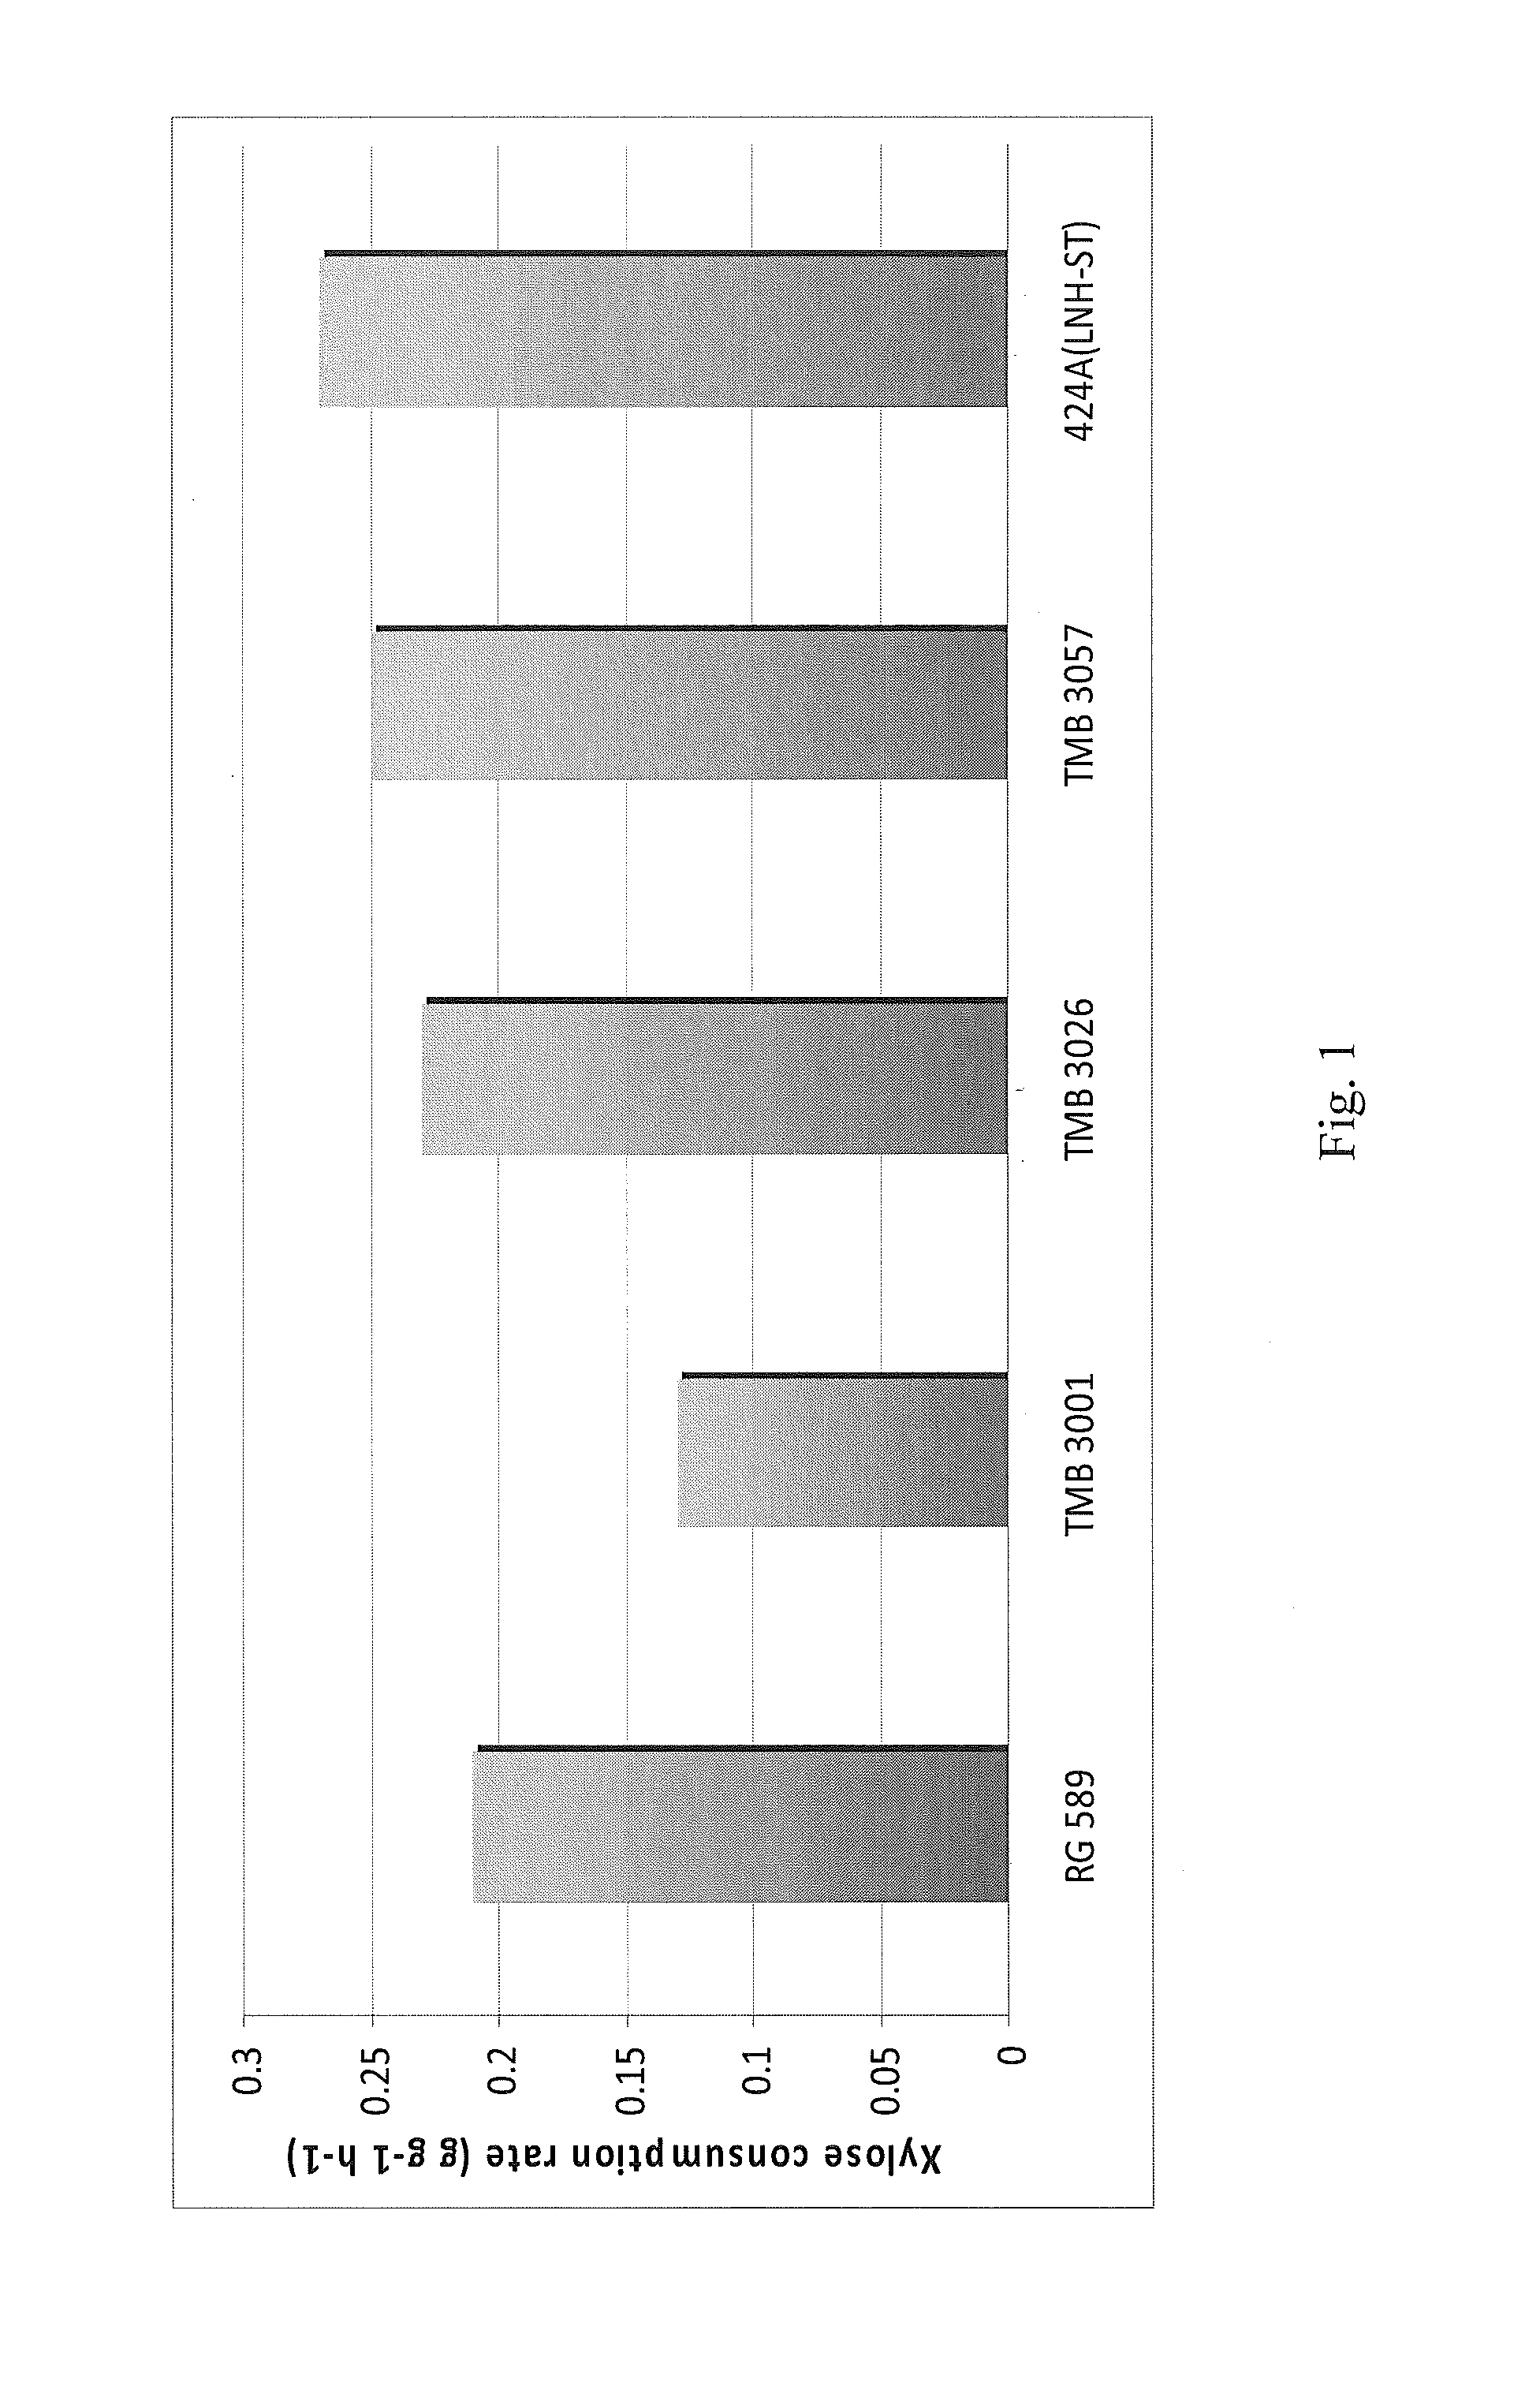 Isolated yeast strain having high xylose consumption rate and process for production of ethanol using the strain